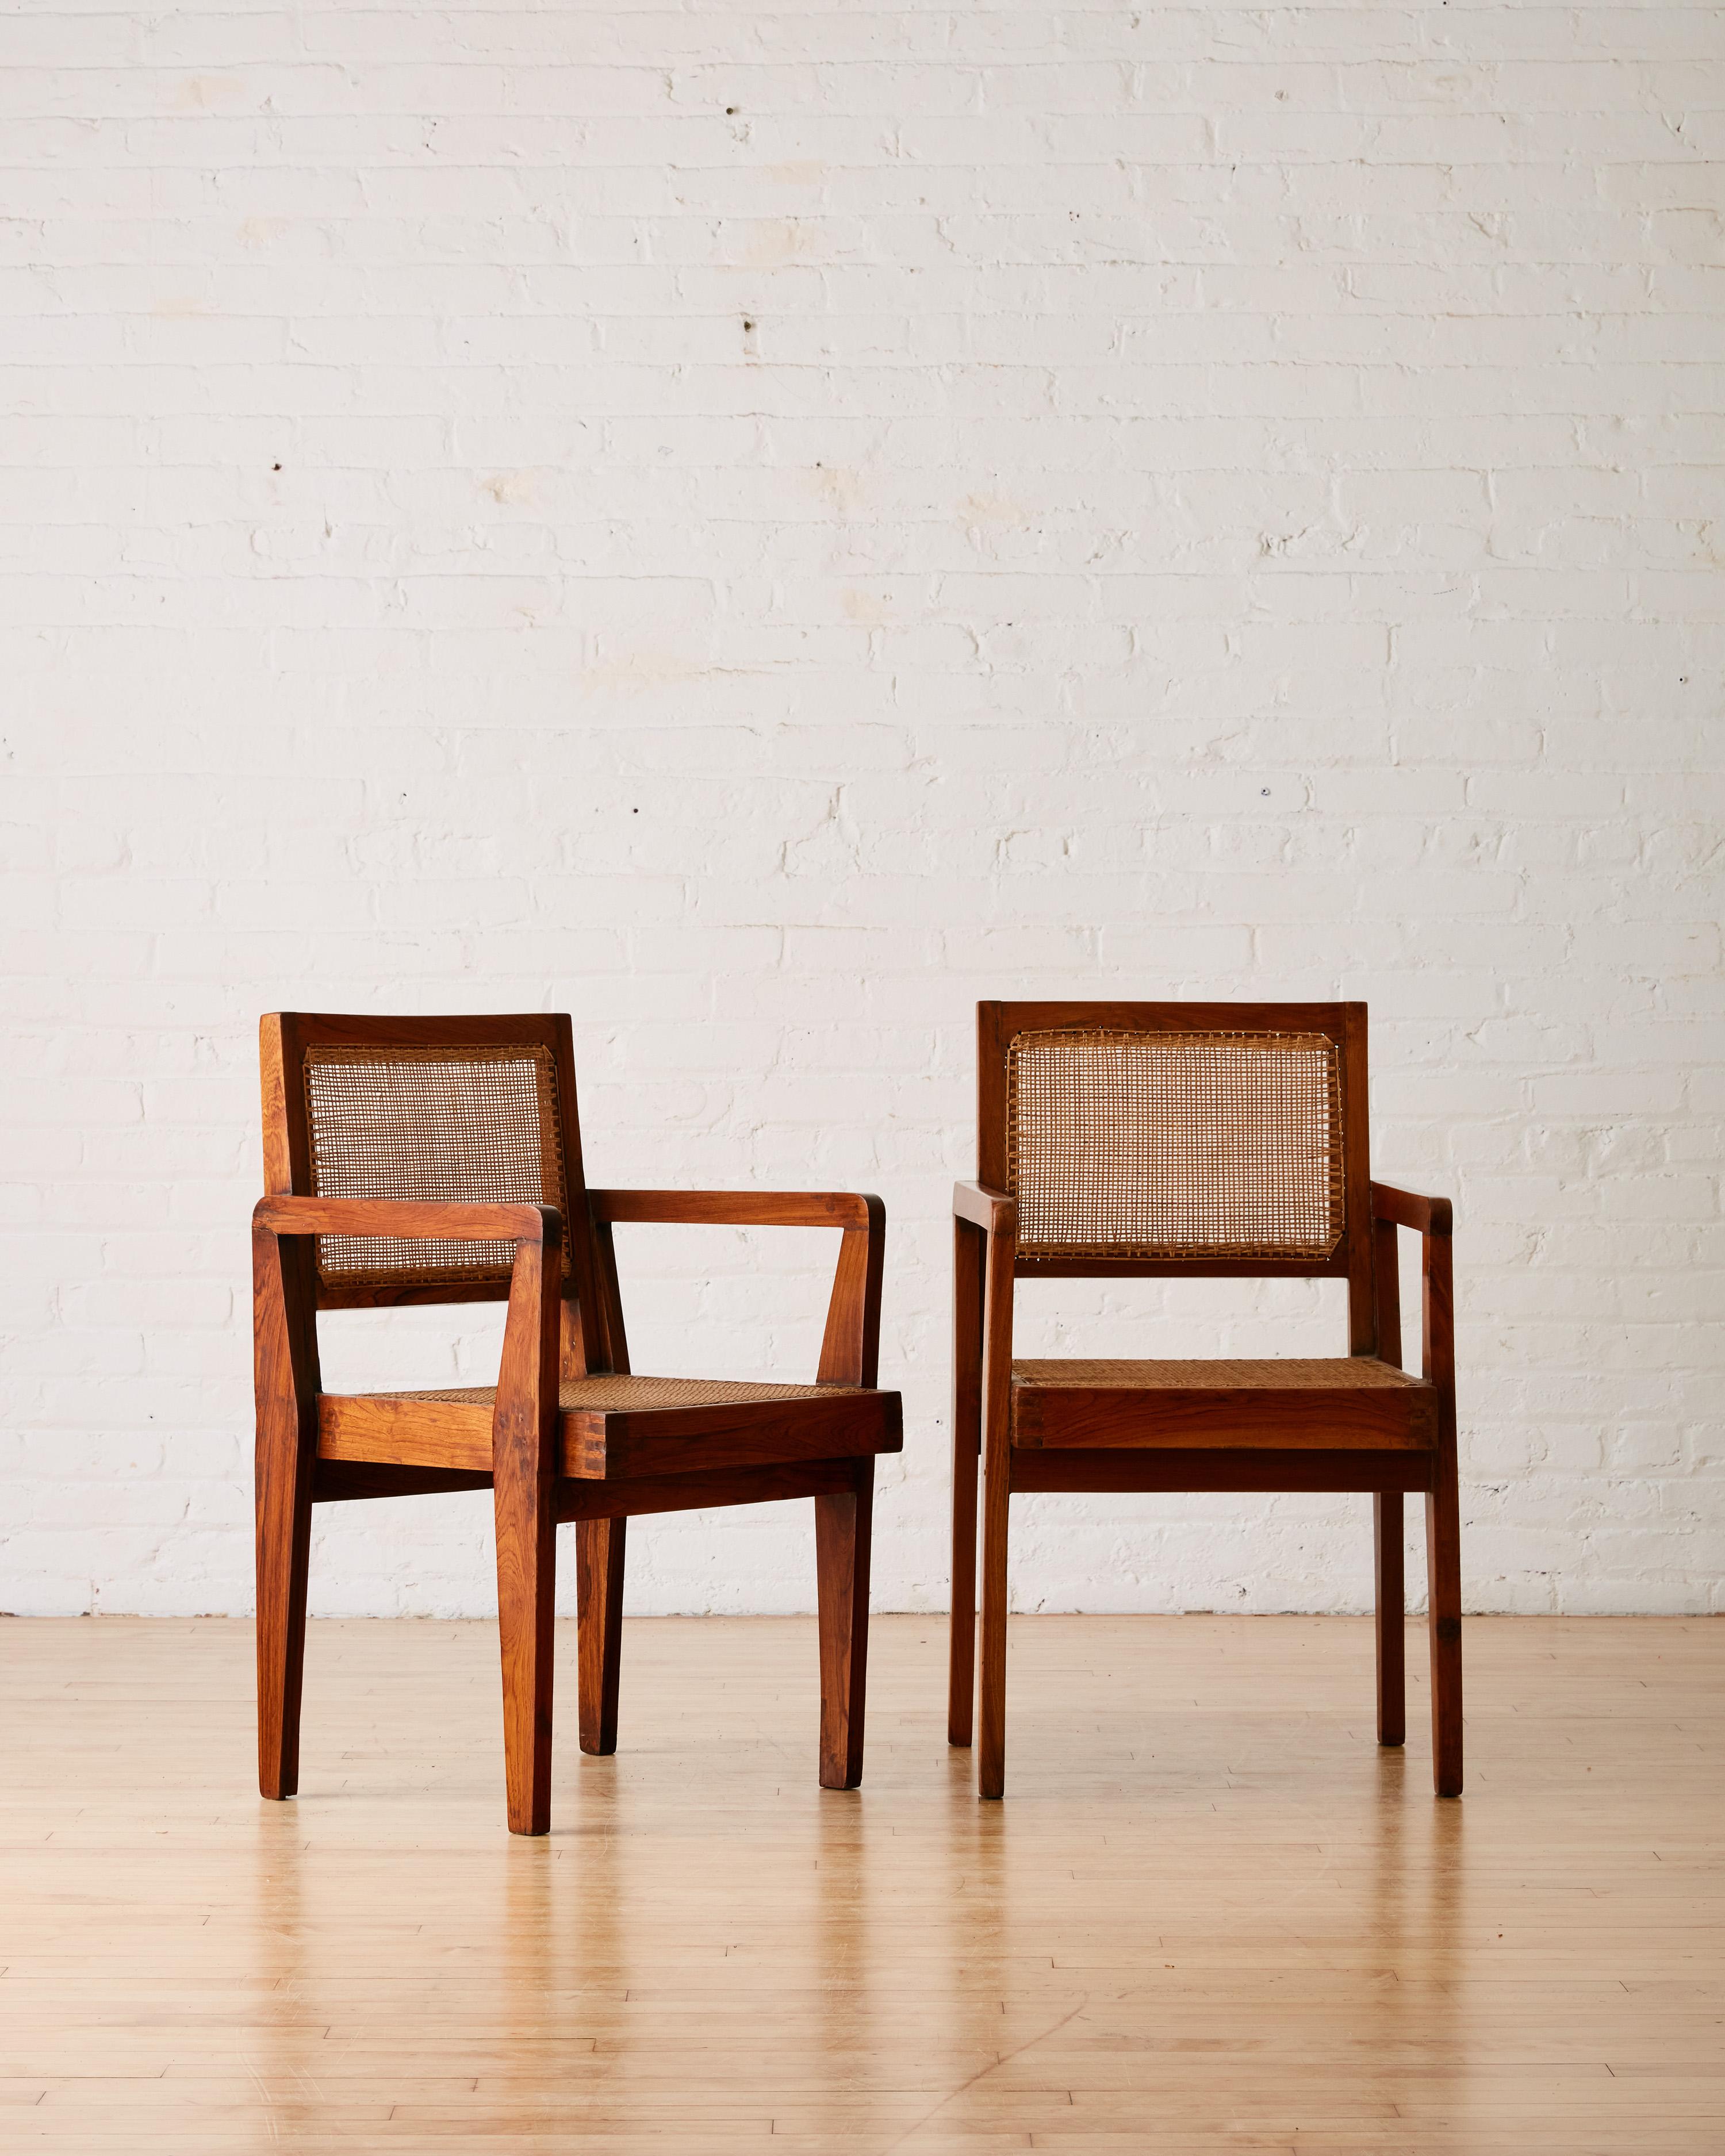 A Pair of Handcrafted Take Down Chairs by Pierre Jeanneret with solid teak wood frame and filled with thin caning. 

Pierre Jeanneret was a Swiss architect and furniture designer who collaborated with his cousin, Le Corbusier, on the design and